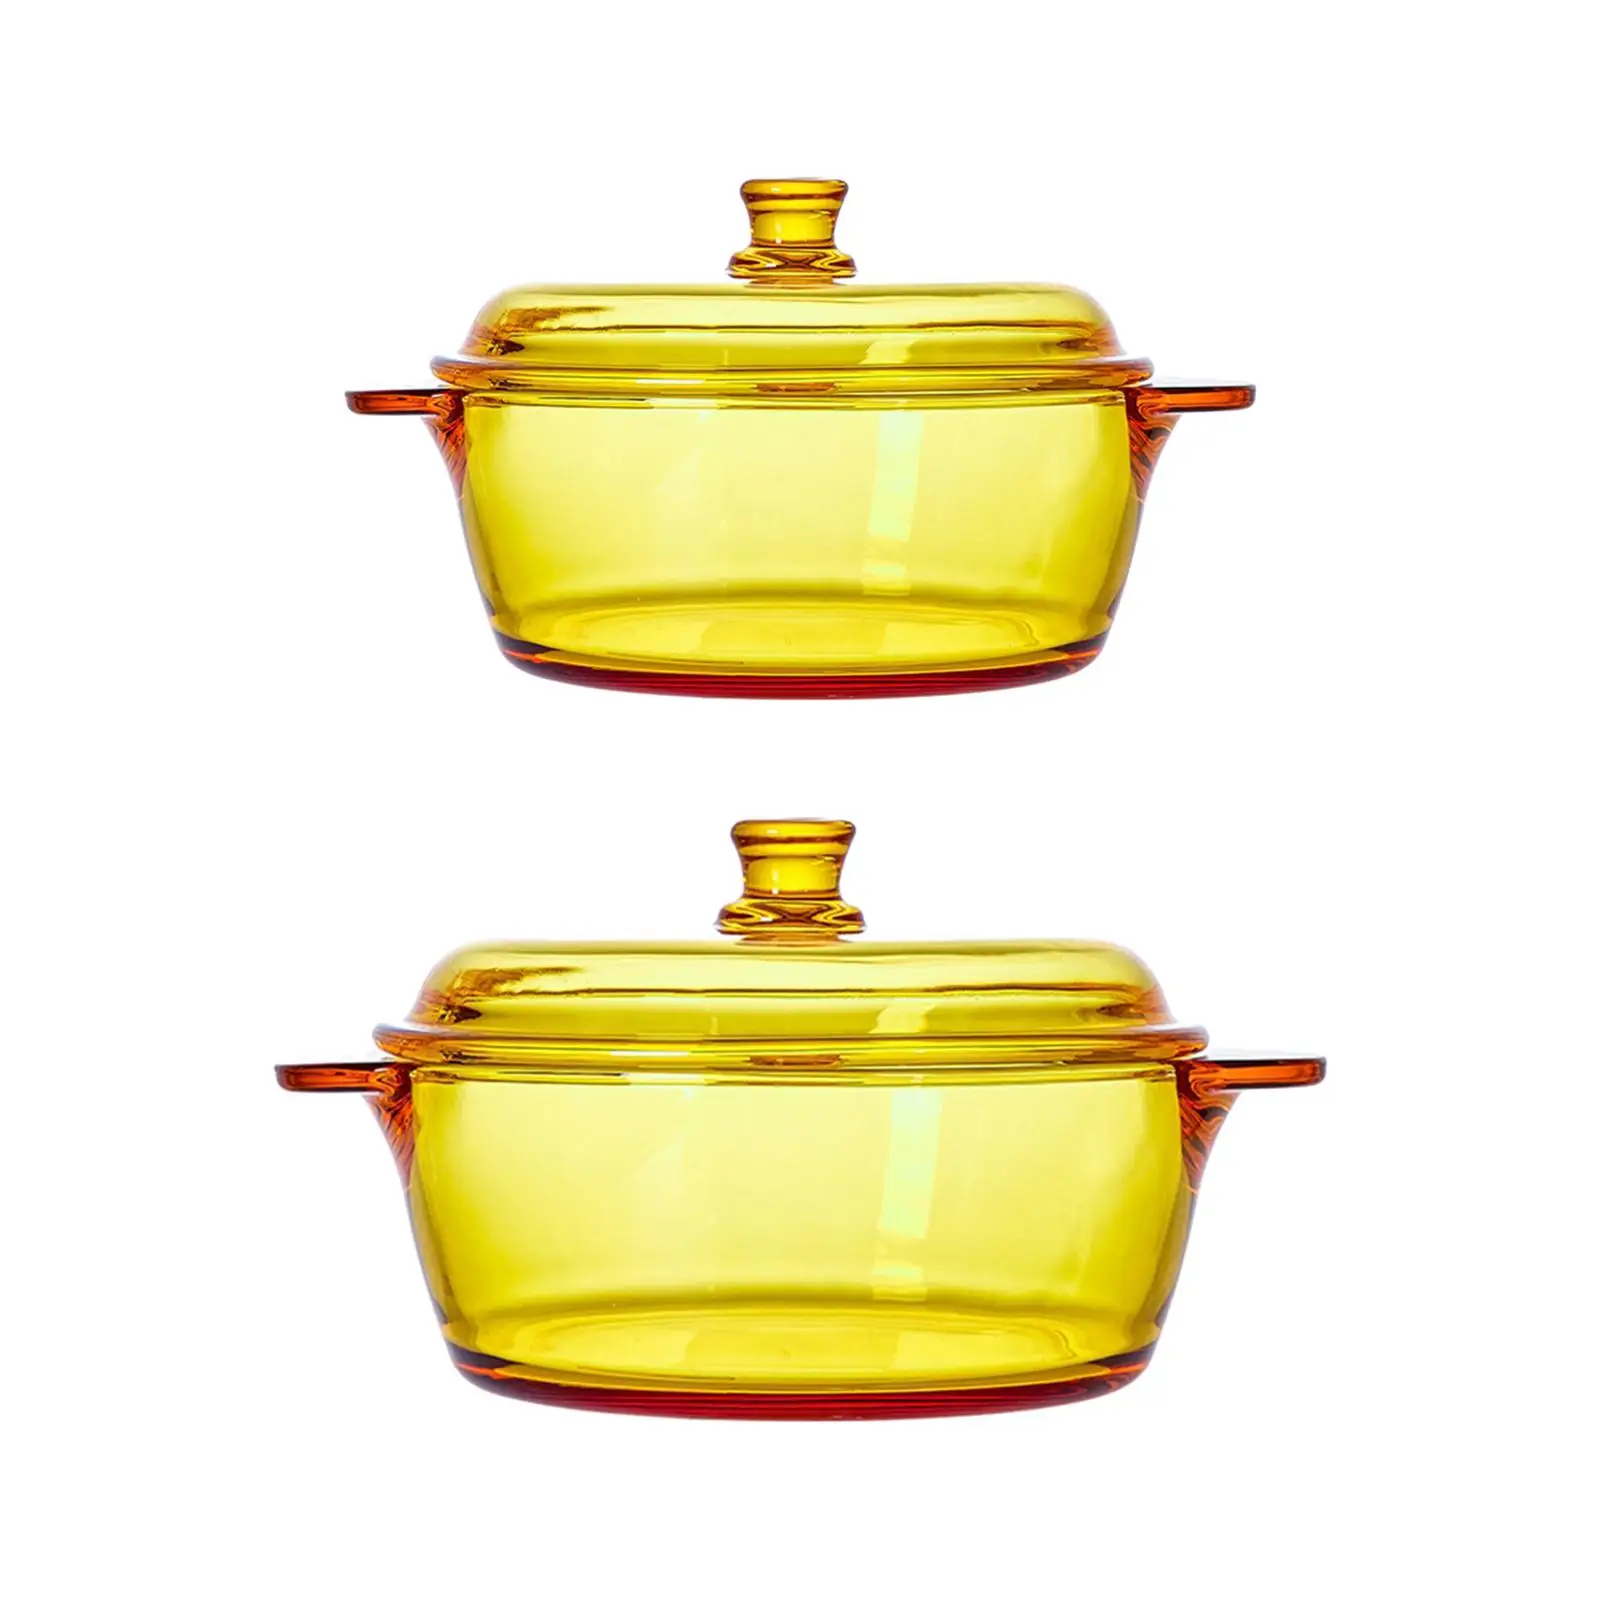 Glass Casserole Dish with Lid Handle Fridge Portable Serving Bowl Multipurpose Oven Glass Bowl for Egg Cereal Pasta Sauces